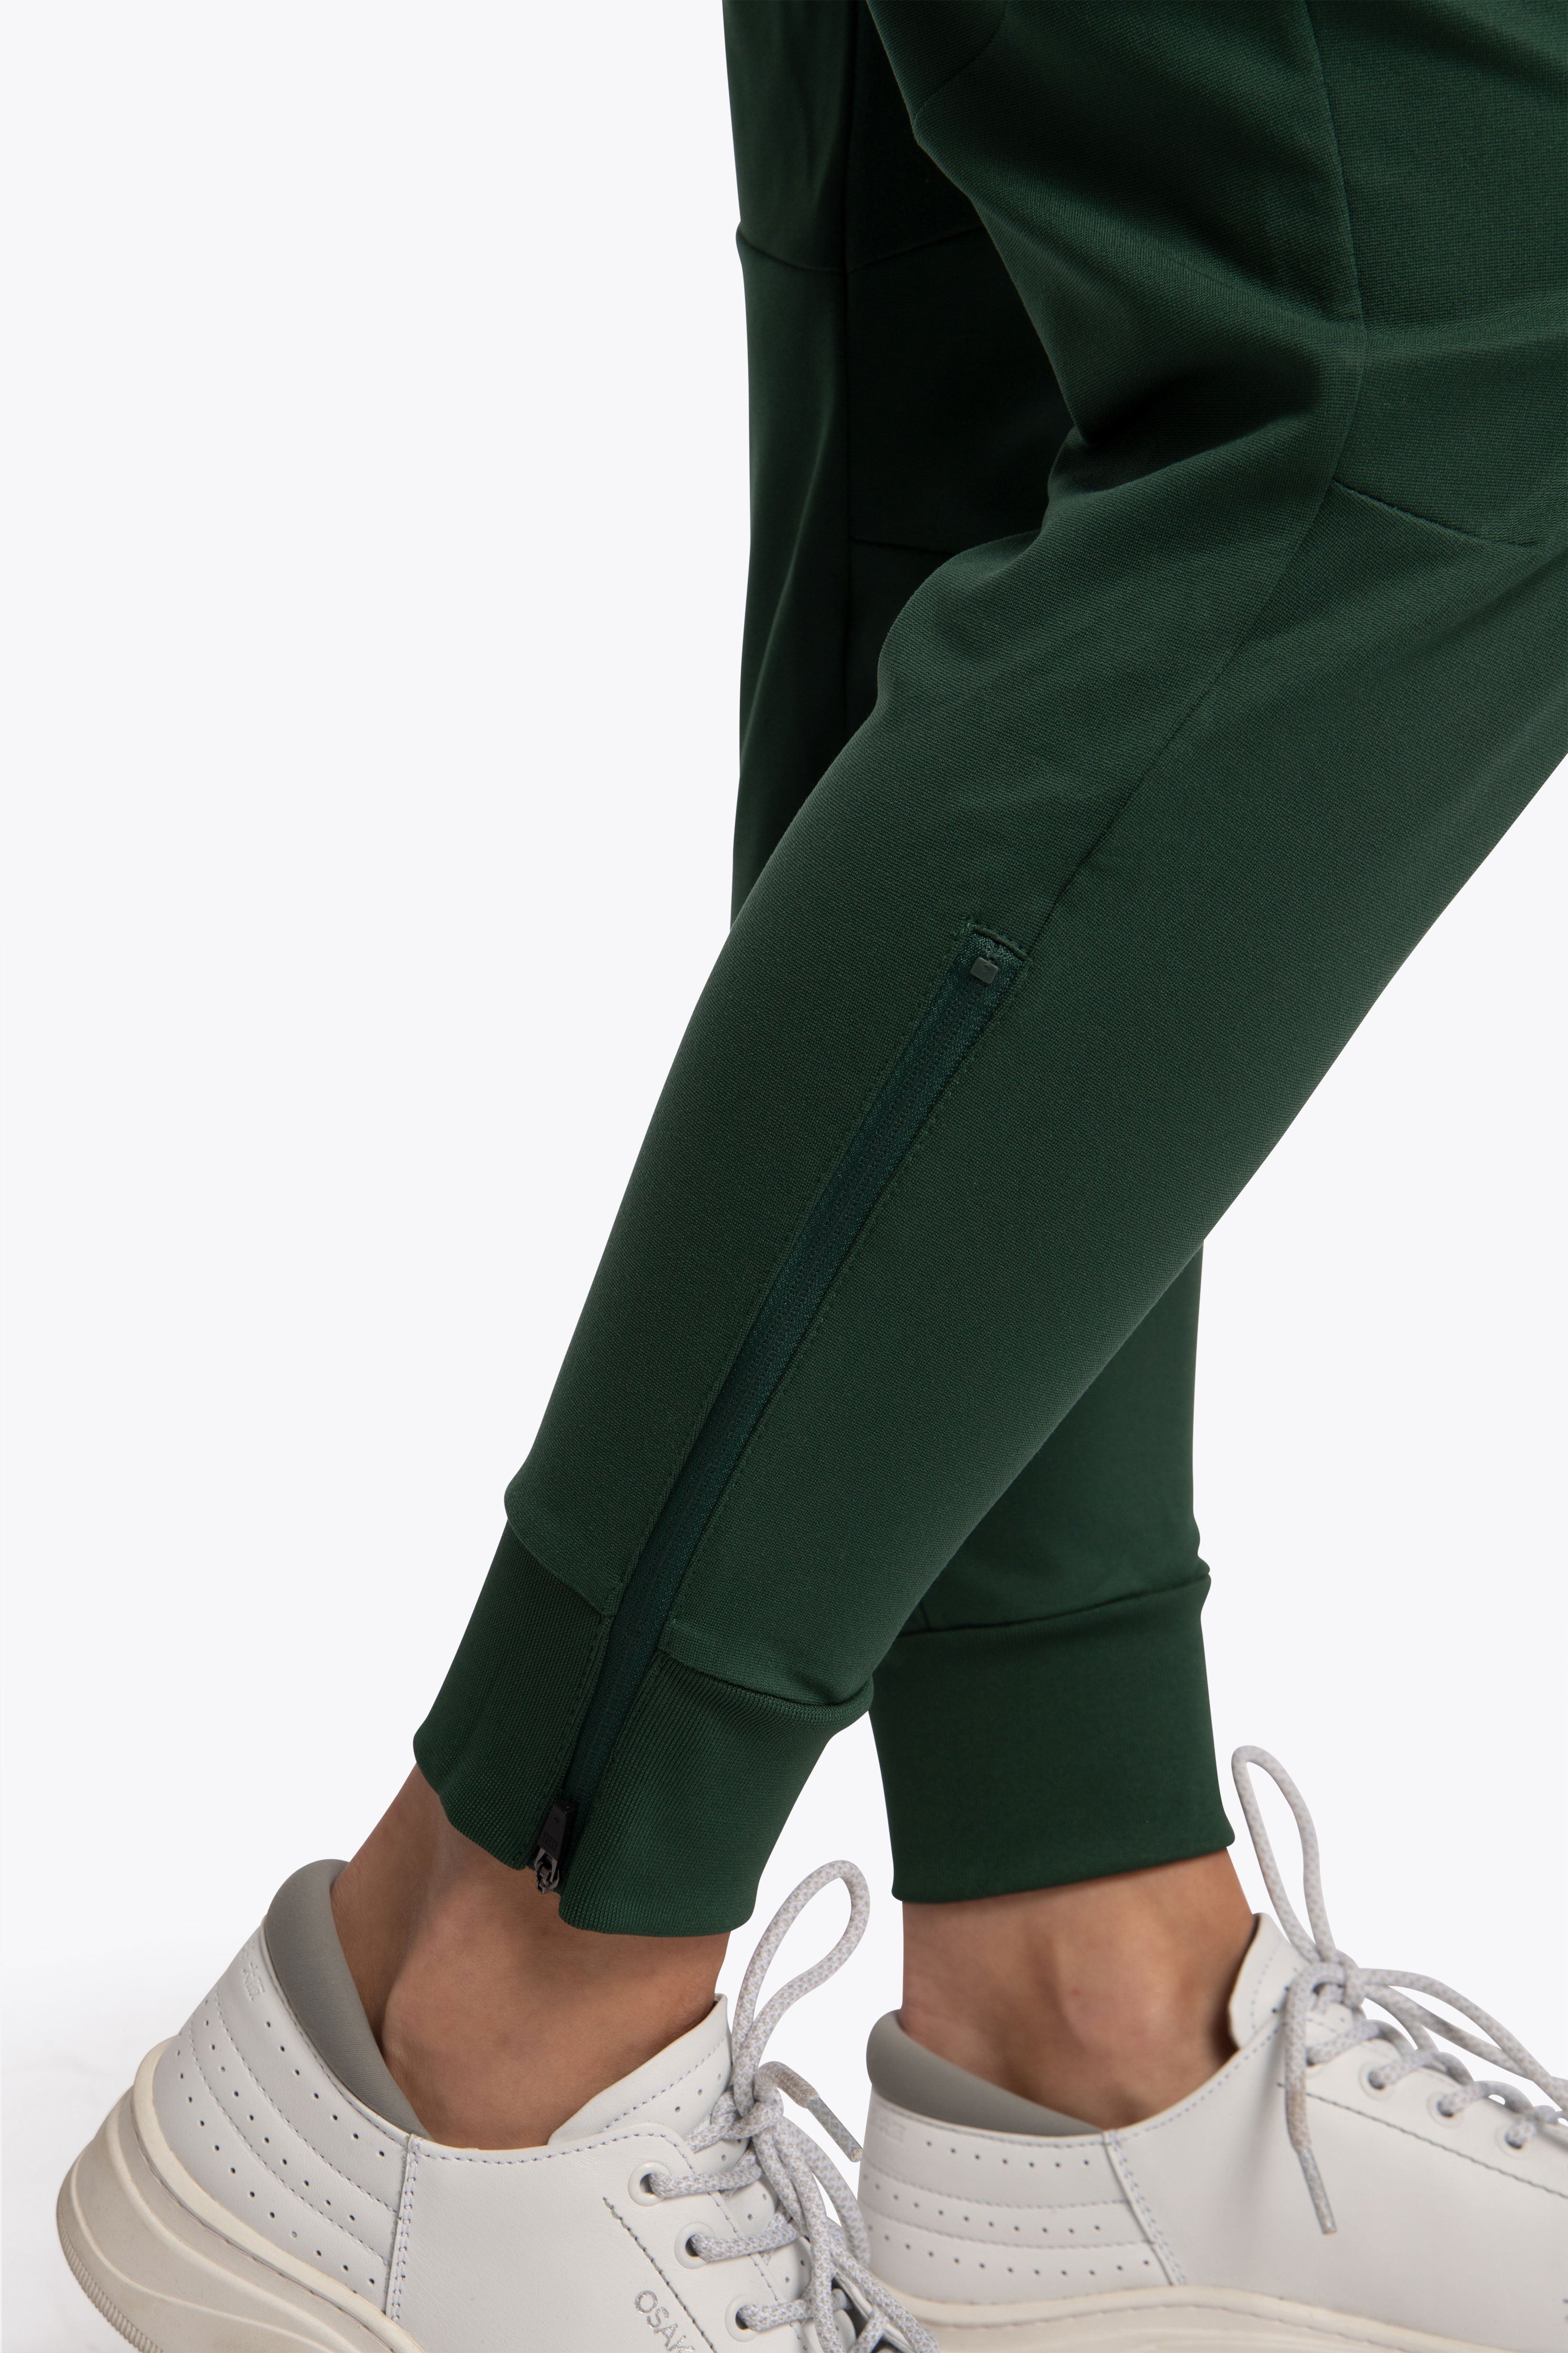 Cotton Track Pants For Women Pack Of 2 (aqua & Olive Green)